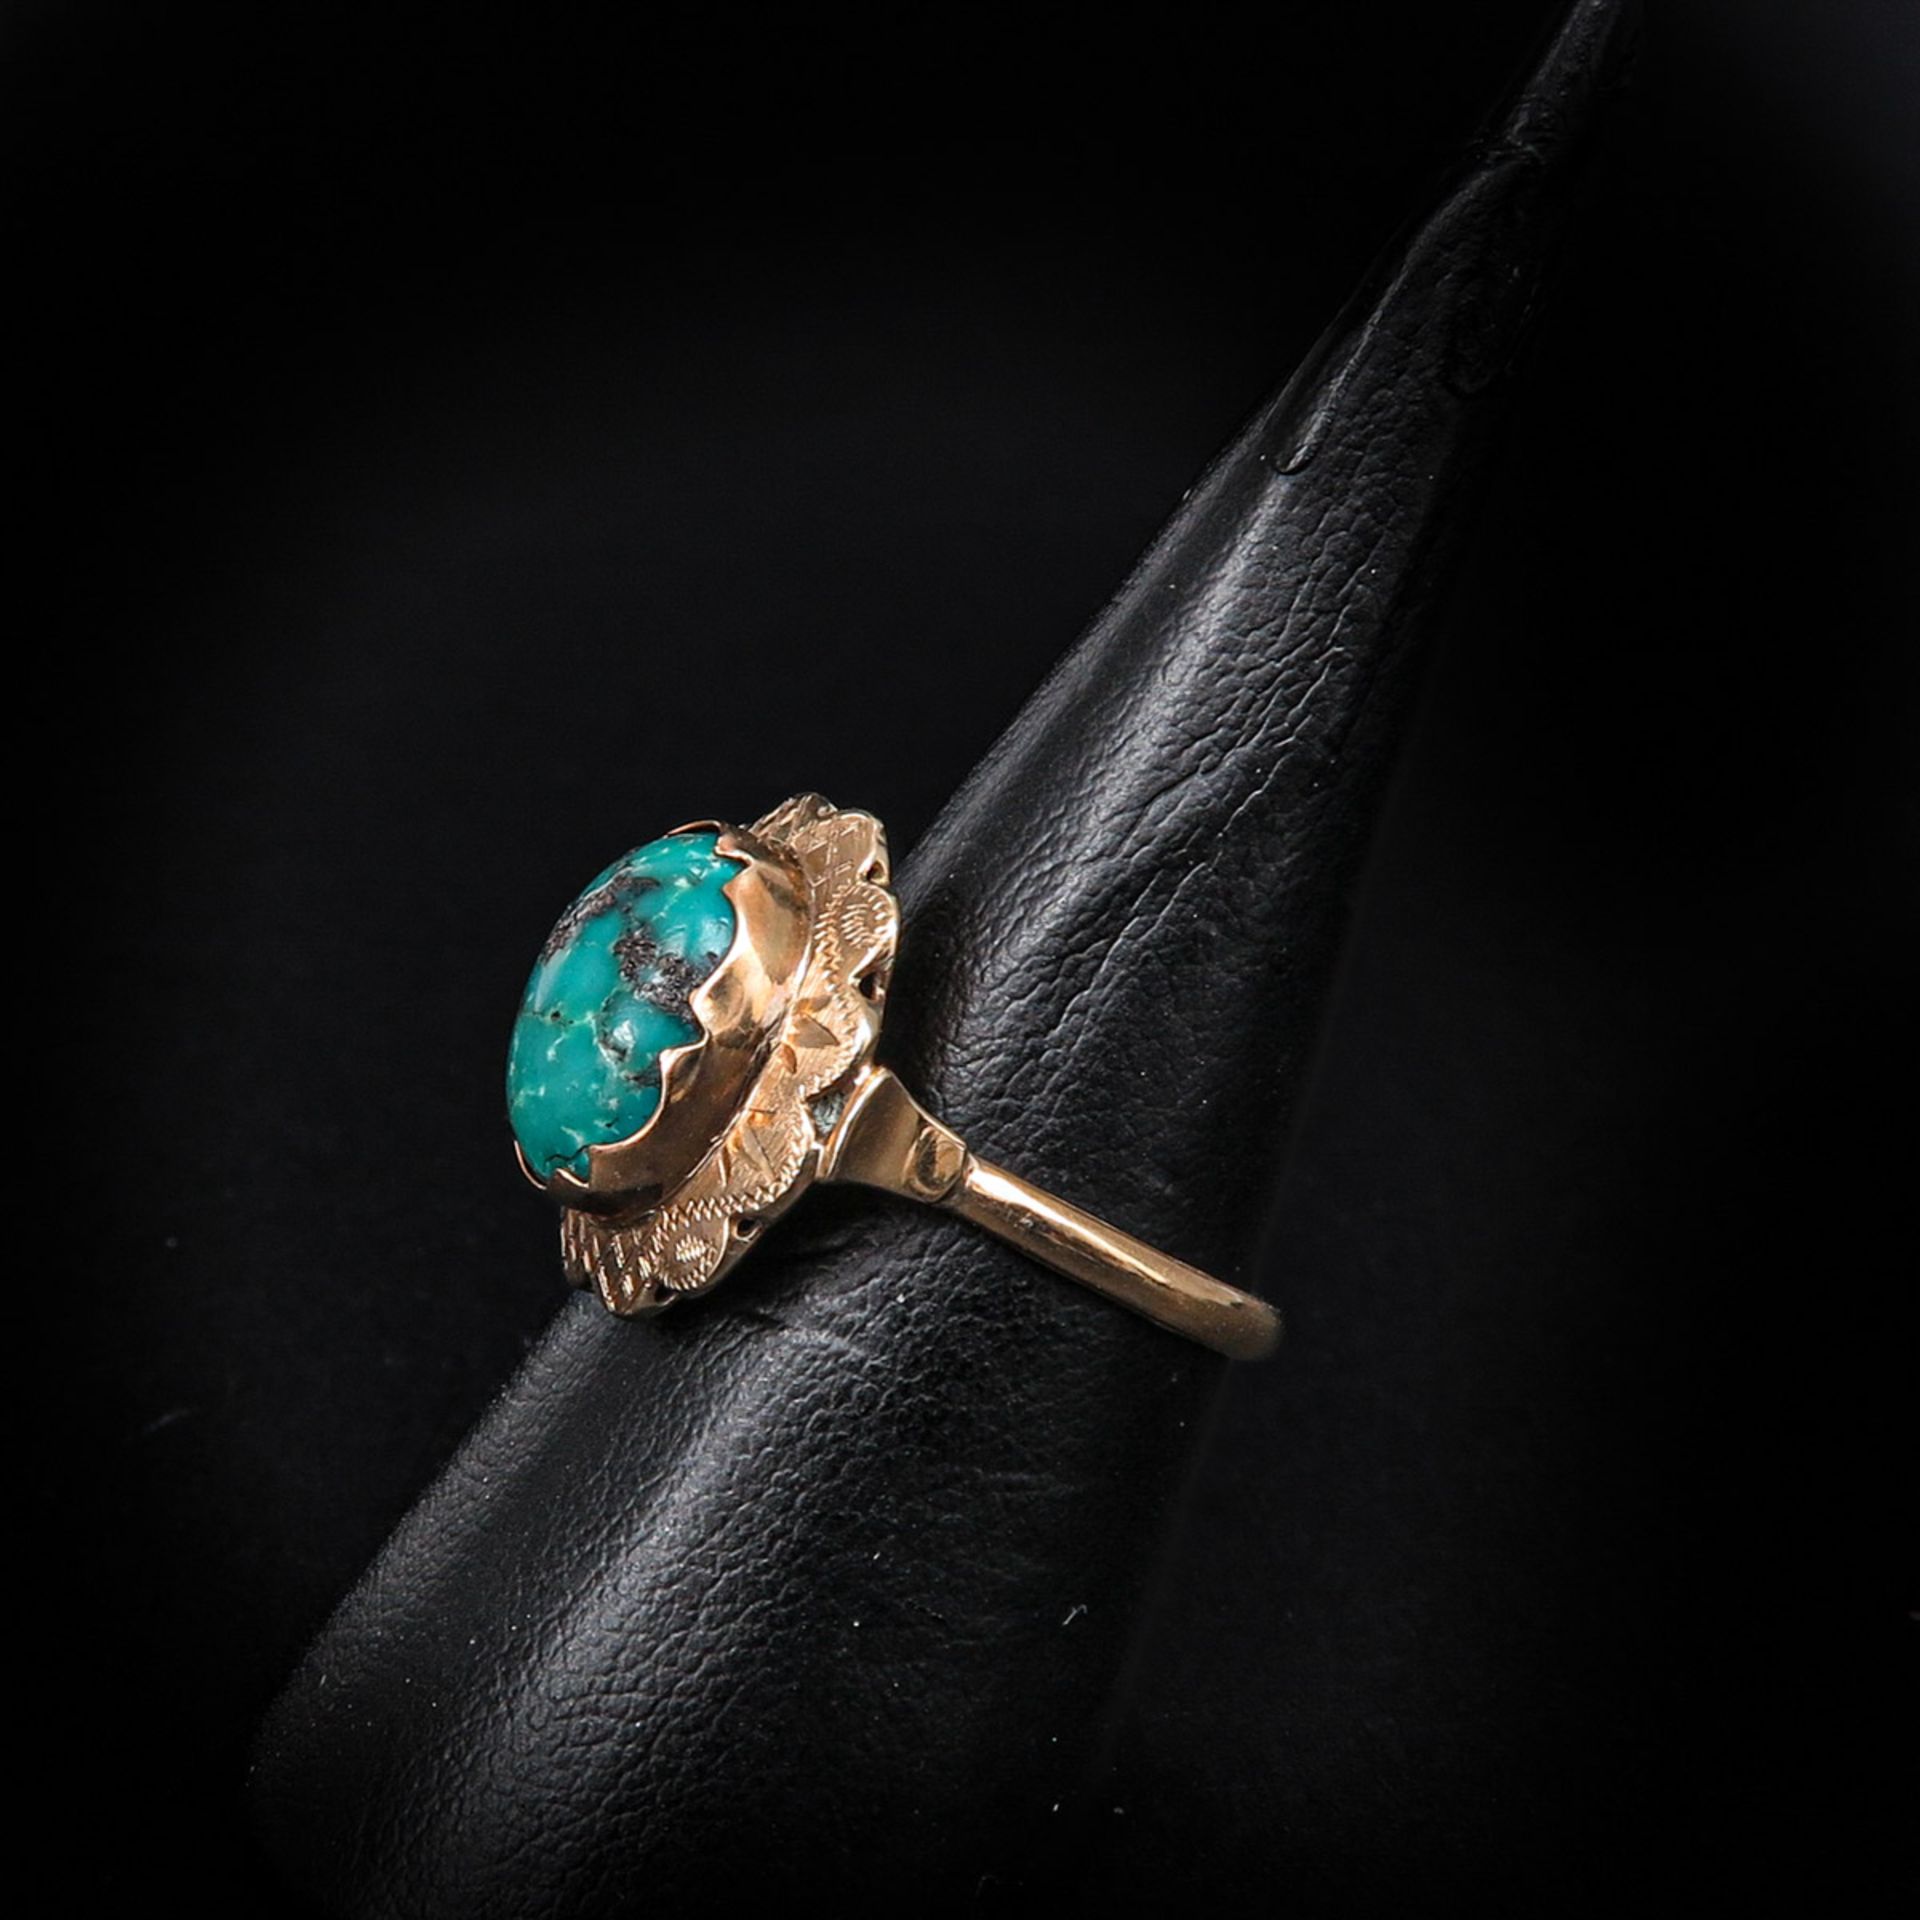 A Turquoise Necklace and Ring along with a Garnet Necklace and Ring - Image 5 of 7